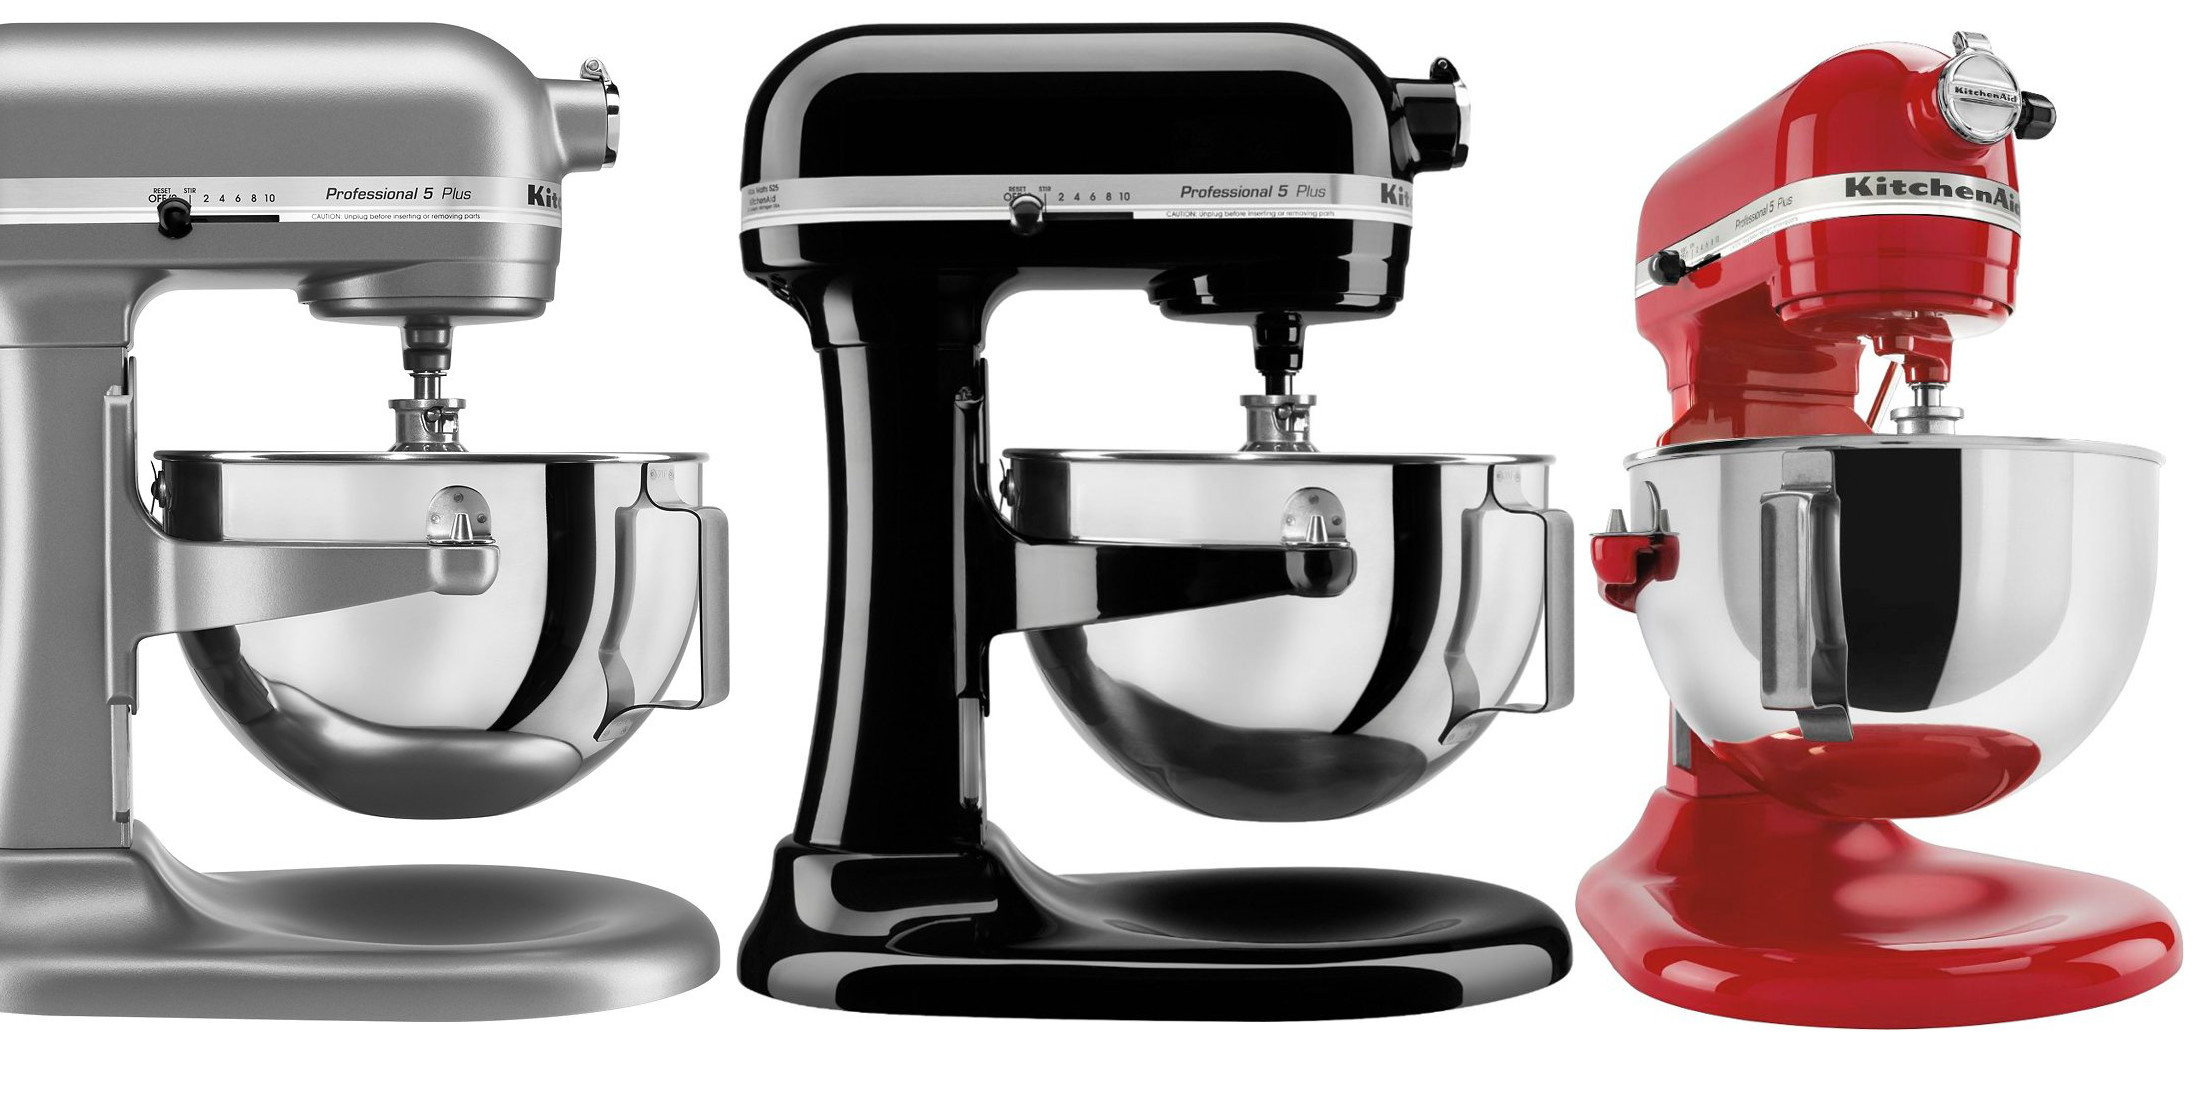 Jump up to the KitchenAid Pro 500 Series Mixer at as much as $300 off today